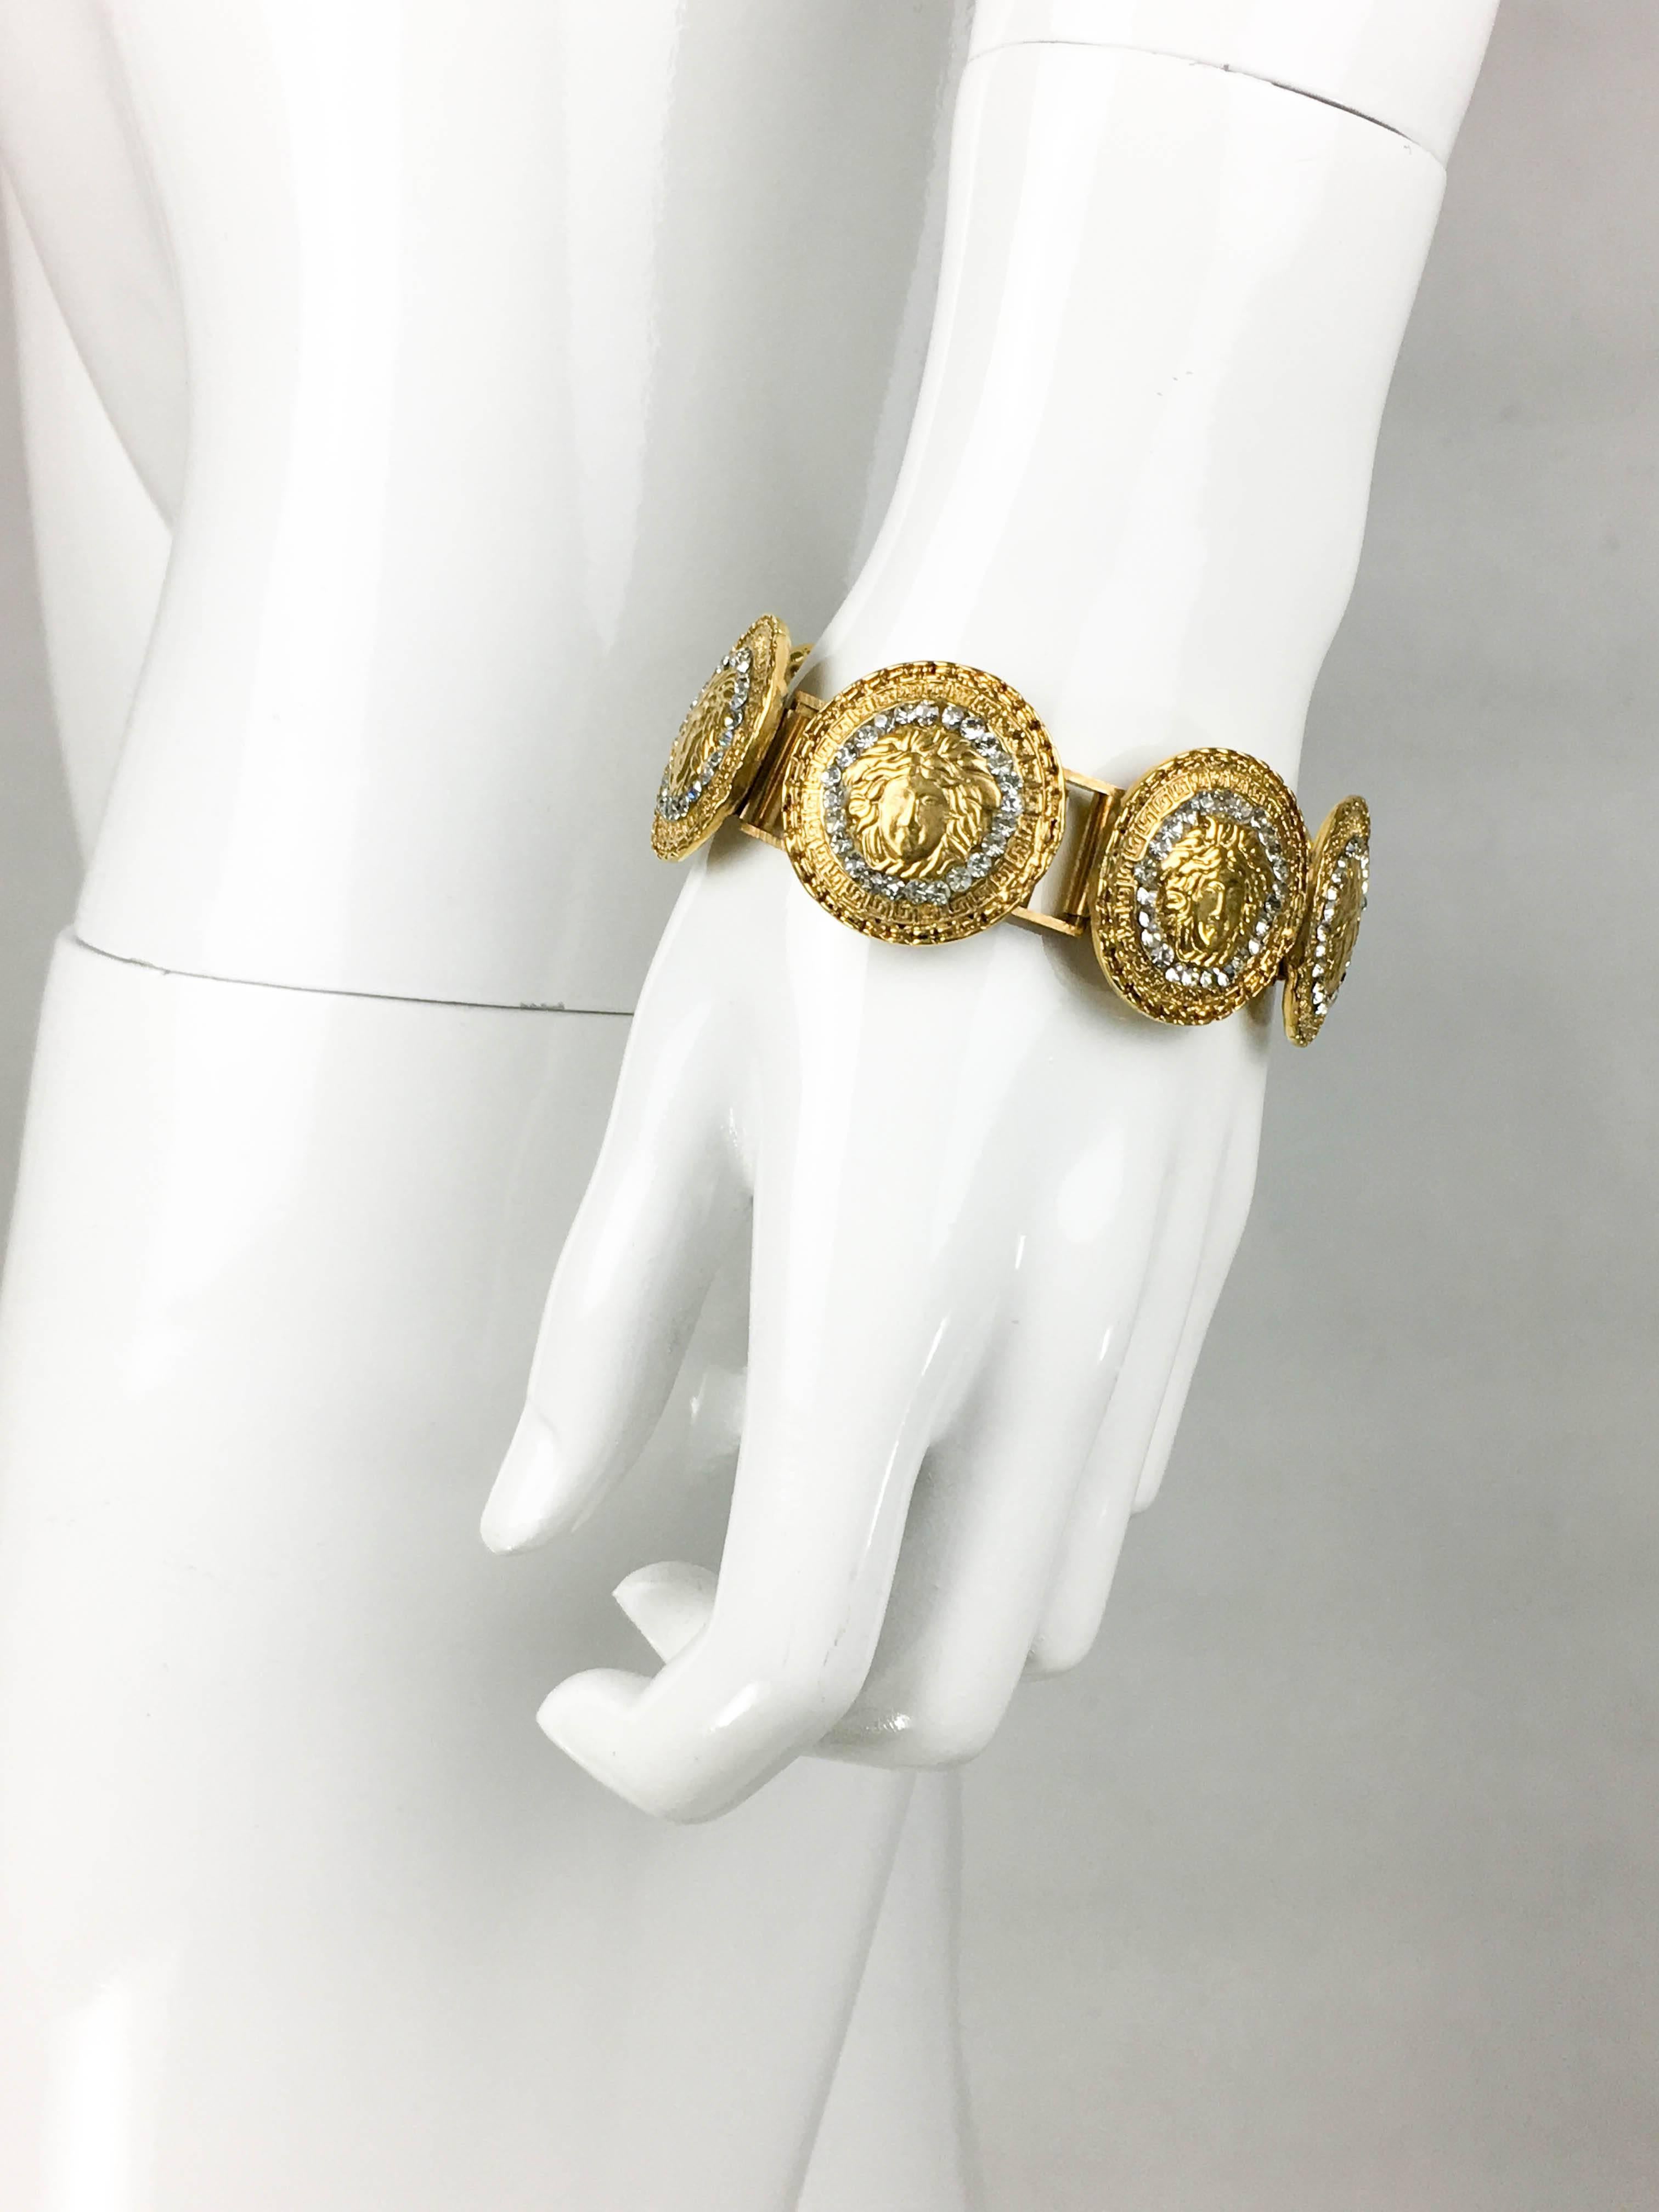 1990's Gianni Versace Gold-Plated Medusa Head with Rhinestones Bracelet For Sale 8